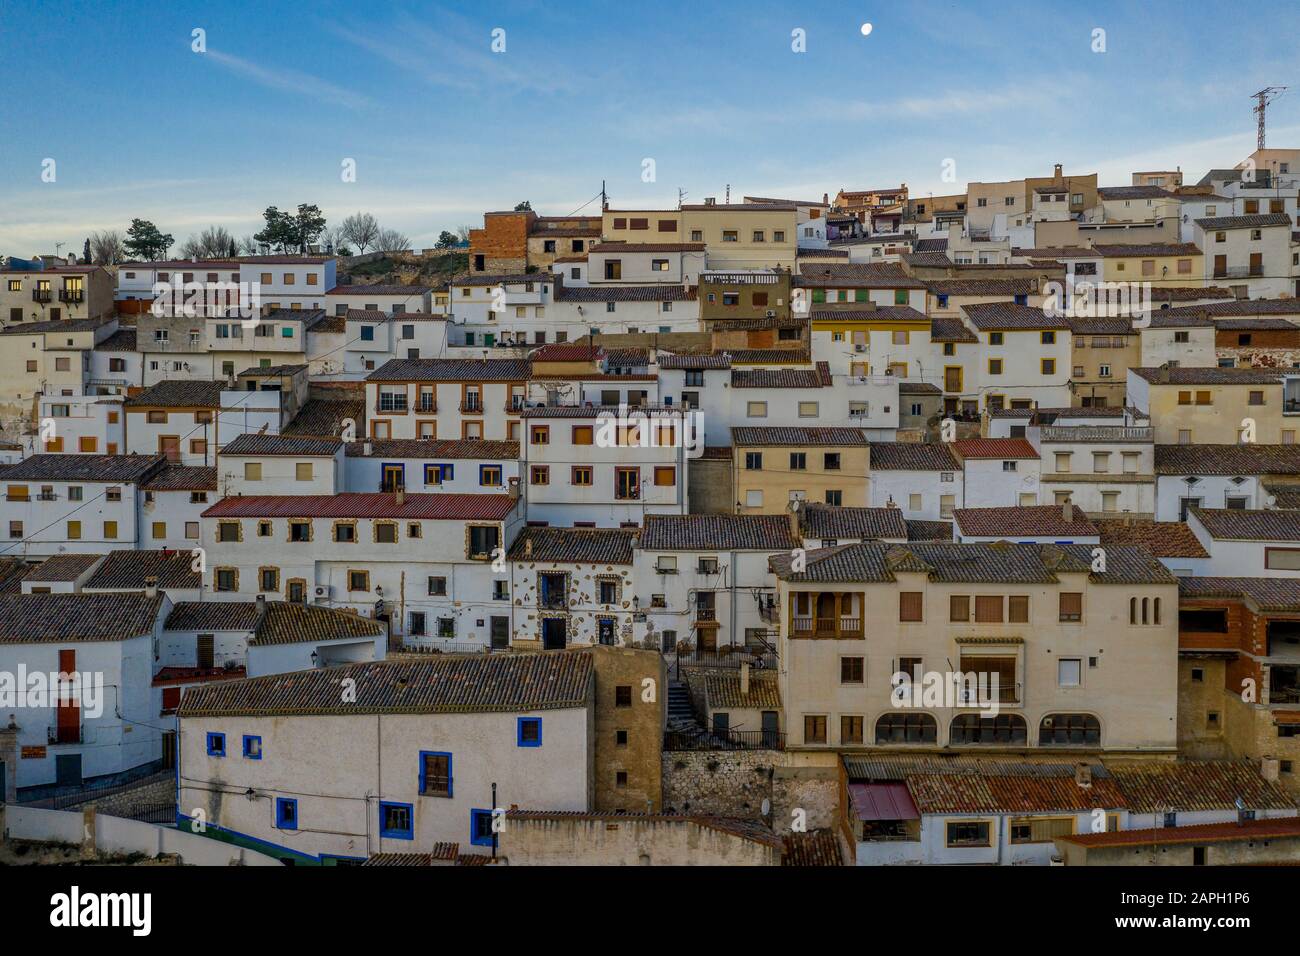 Colorful houses with square windows and traditional roofs in Alcala del Jucar Spain Stock Photo